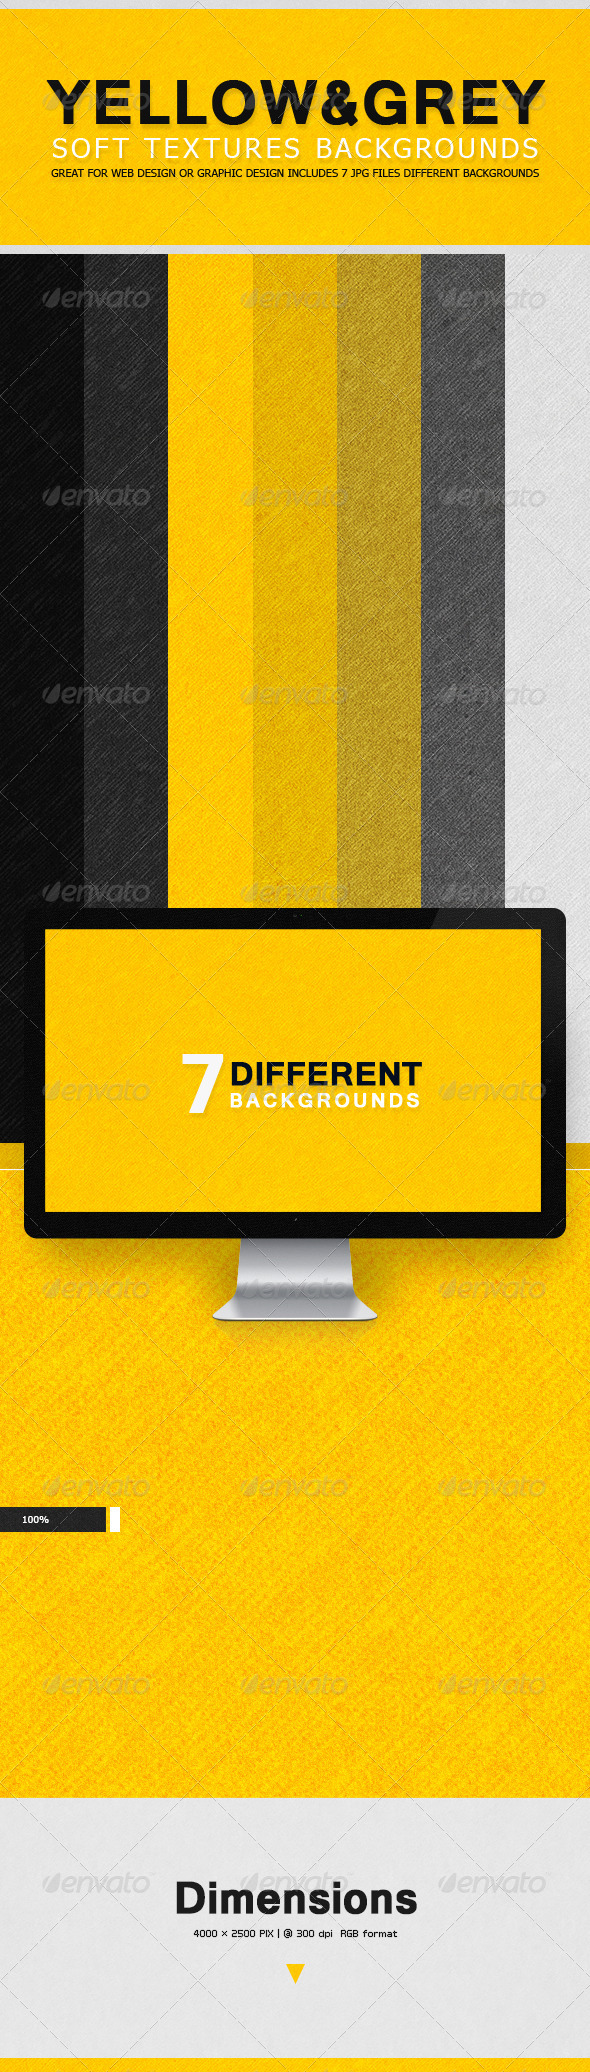 GraphicRiver Soft Textures Backgrounds Yellow & Grey 7677291